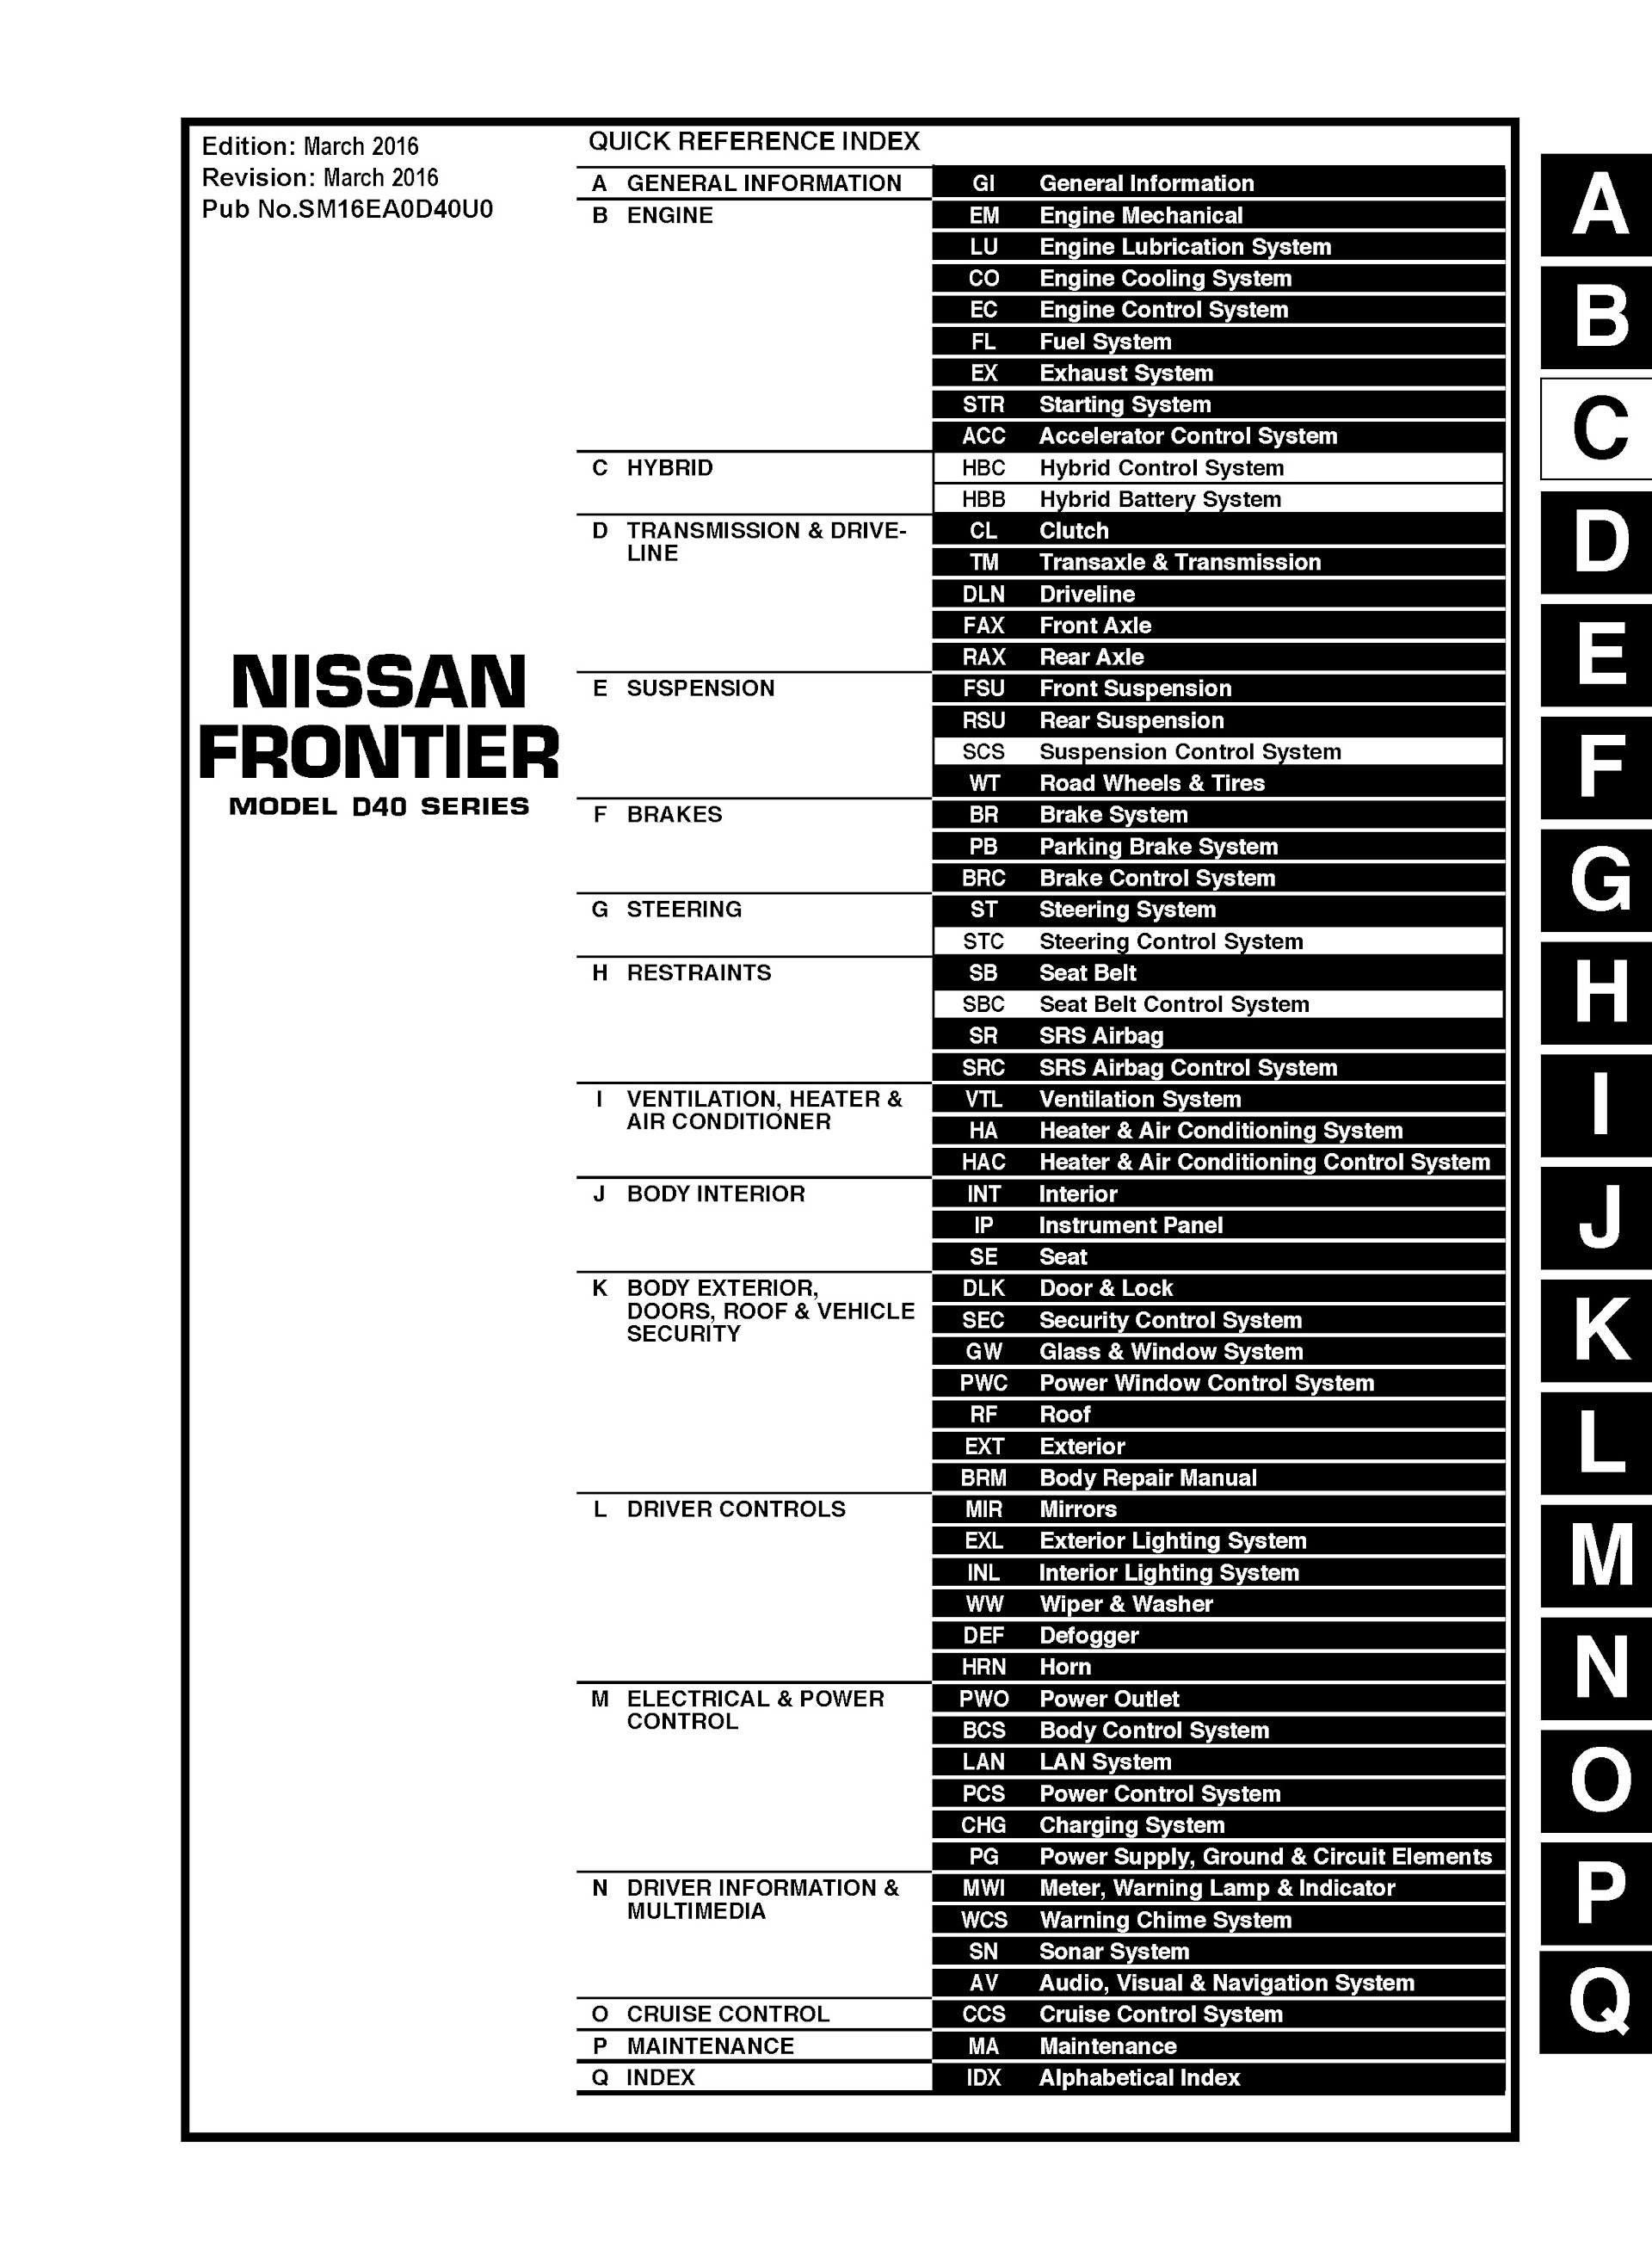 Table of Contents 2017 Nissan Frontier Repair Manual